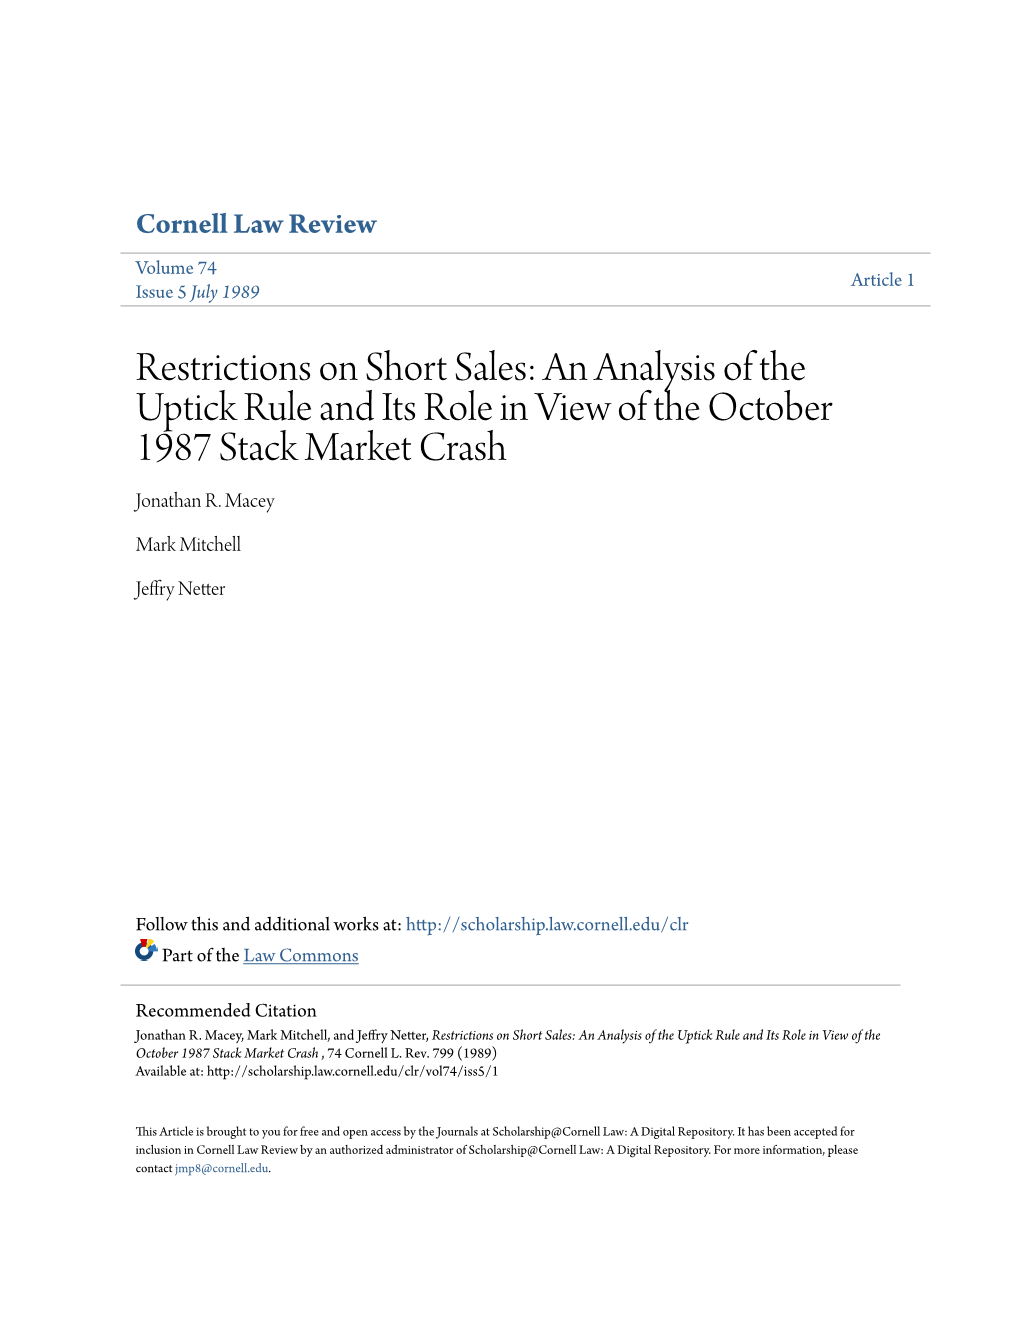 Restrictions on Short Sales: an Analysis of the Uptick Rule and Its Role in View of the October 1987 Stack Market Crash Jonathan R